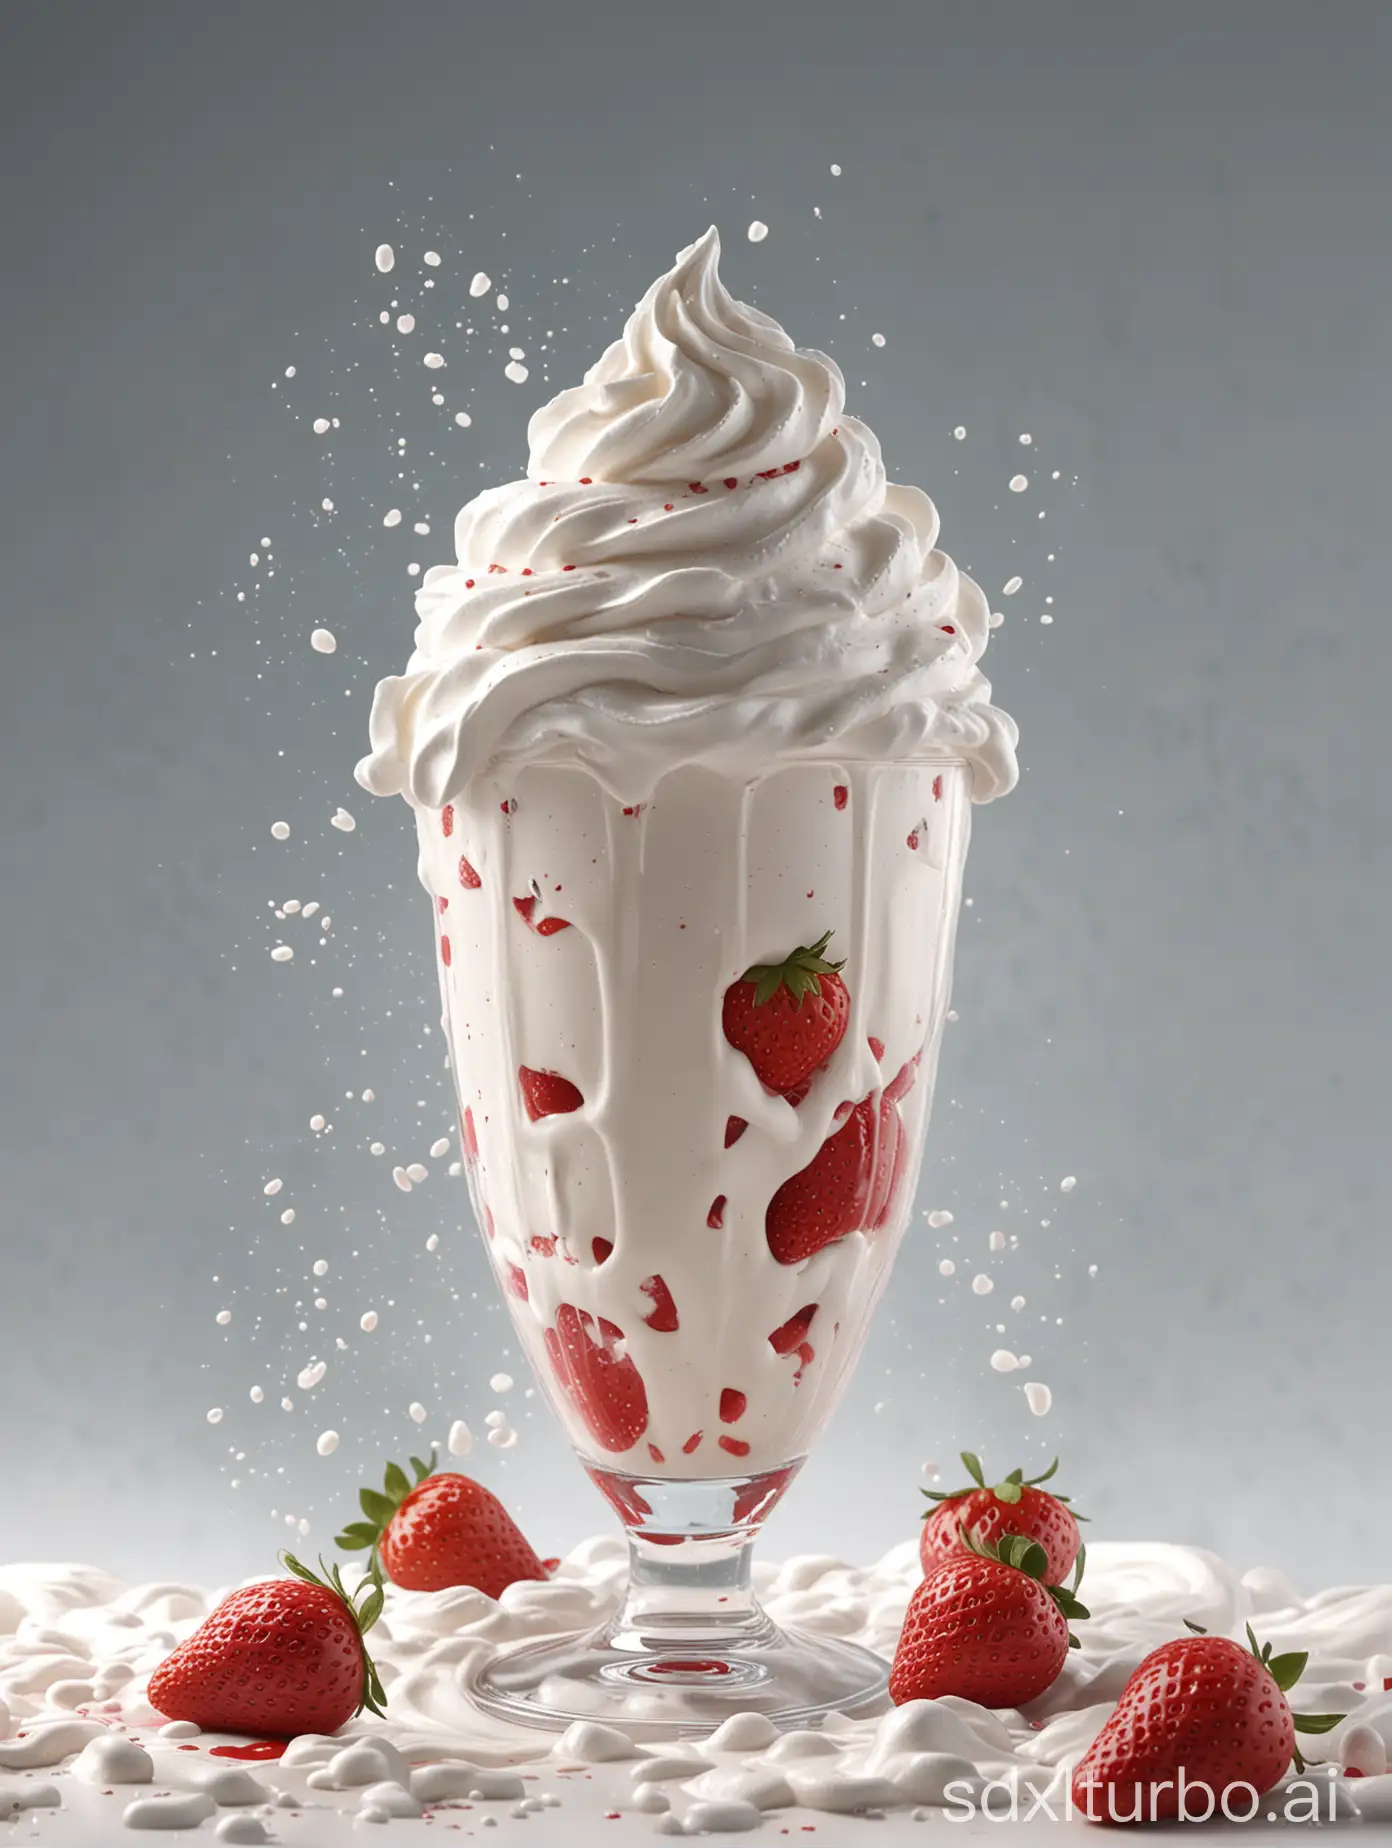 a whipped cream with strawberries,realistic vfx simulation,behance favourite,swirl,milkshake,cgsociety ),3dcg,super high speed photography,inspired by Oleg Lipchenko,red and white colors,imaginfx,aaron earley